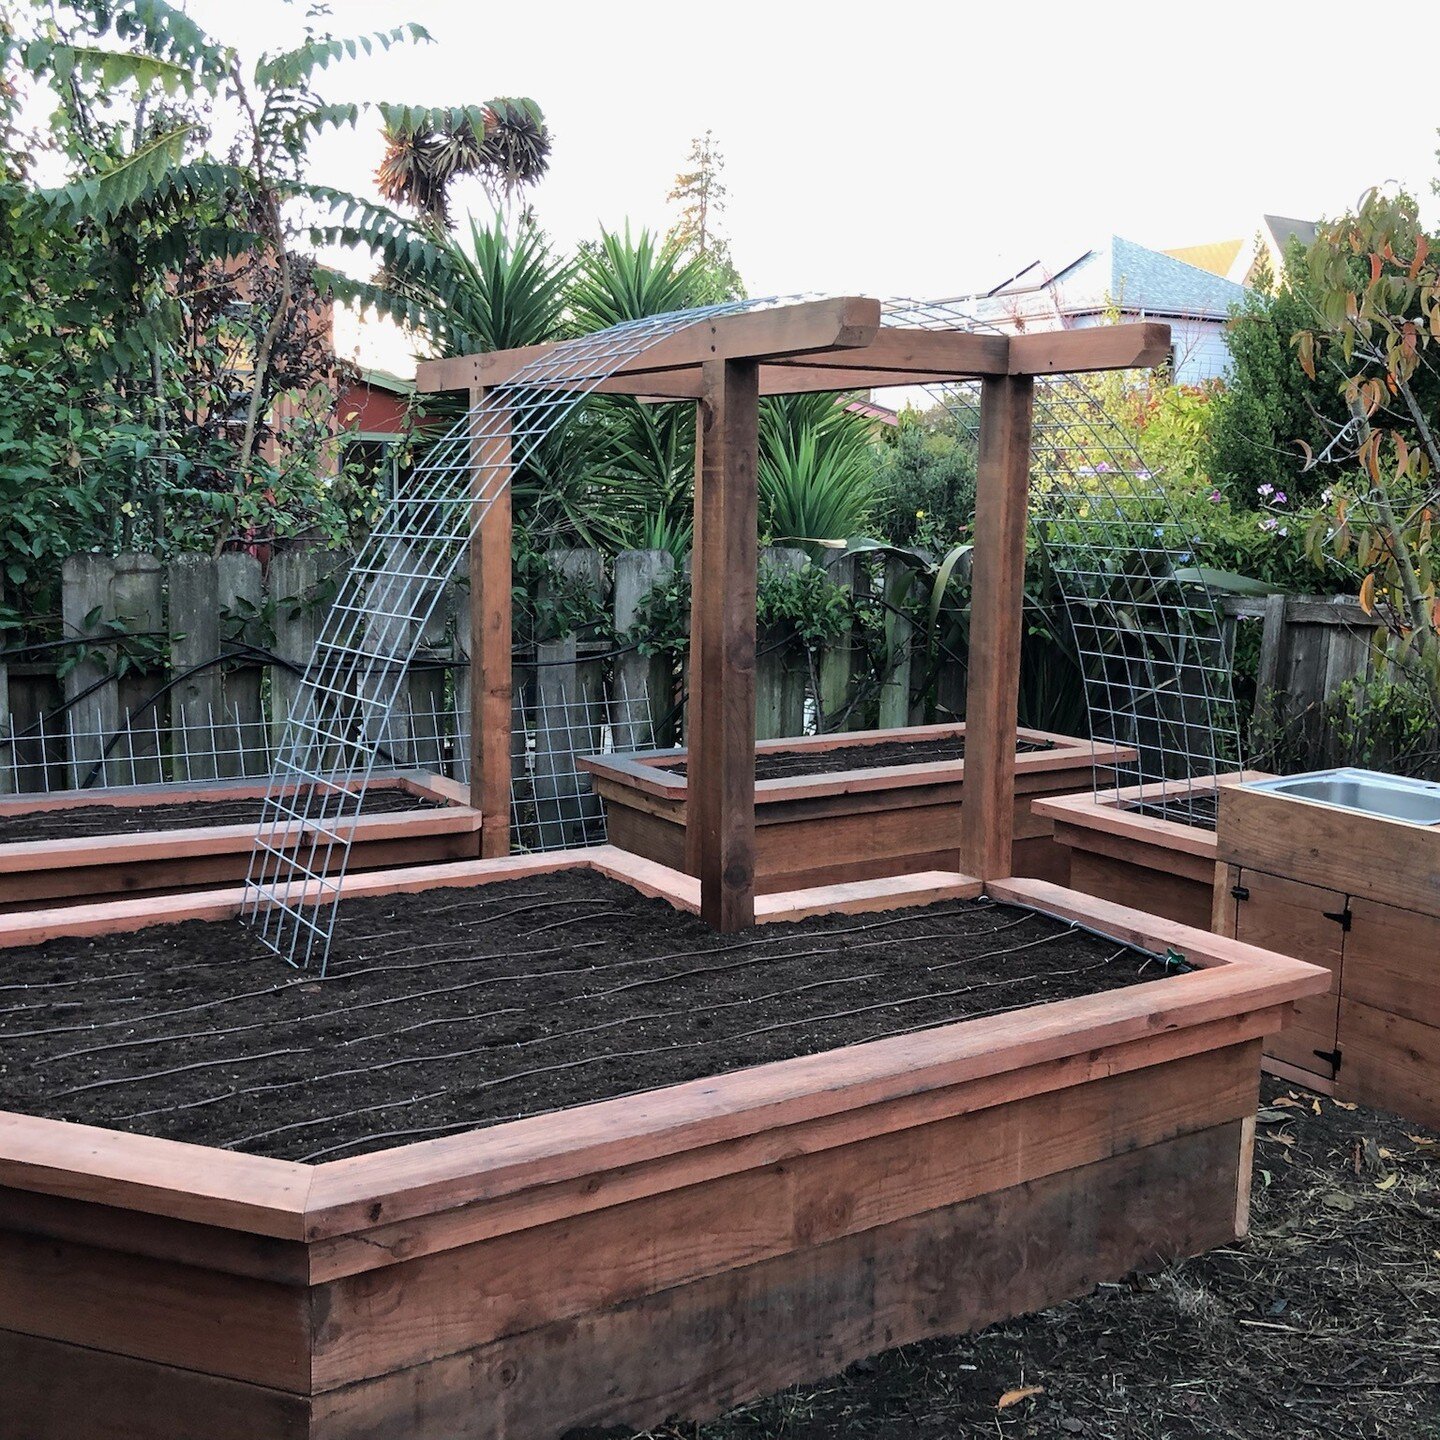 Our latest garden design/build in Berkeley CA. The client and I had fun incorporating the sink, cabinet, arbor and trellis into the design. Next up are the plants!

#gardendesign #gardenbuilding #eatlocalgrown #estbaygardening #newfoundfoodscapes #or